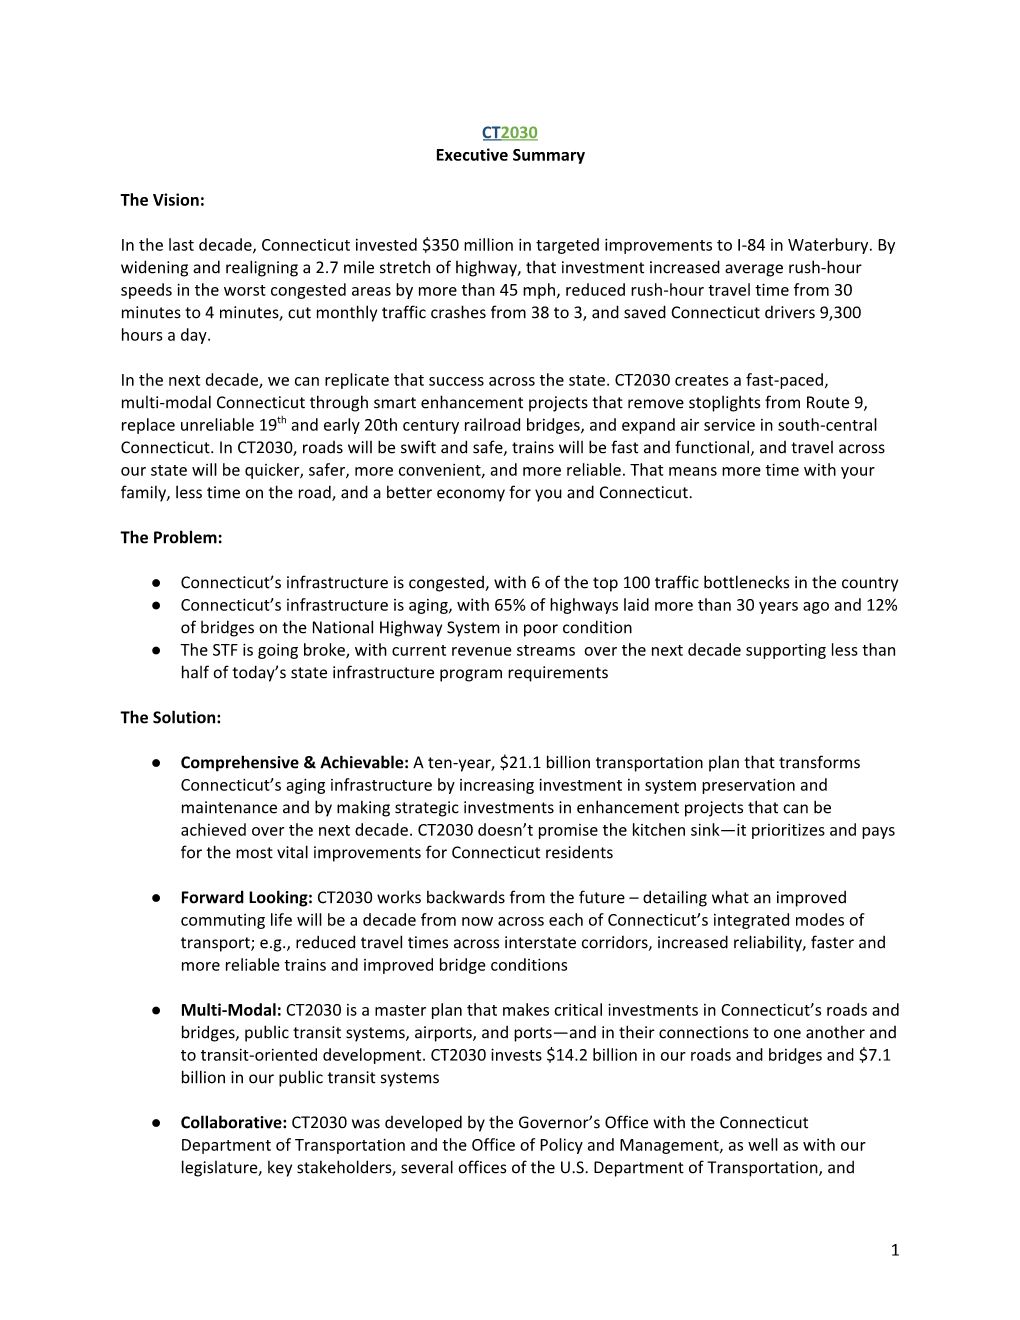 CT​2030 Executive Summary the Vision